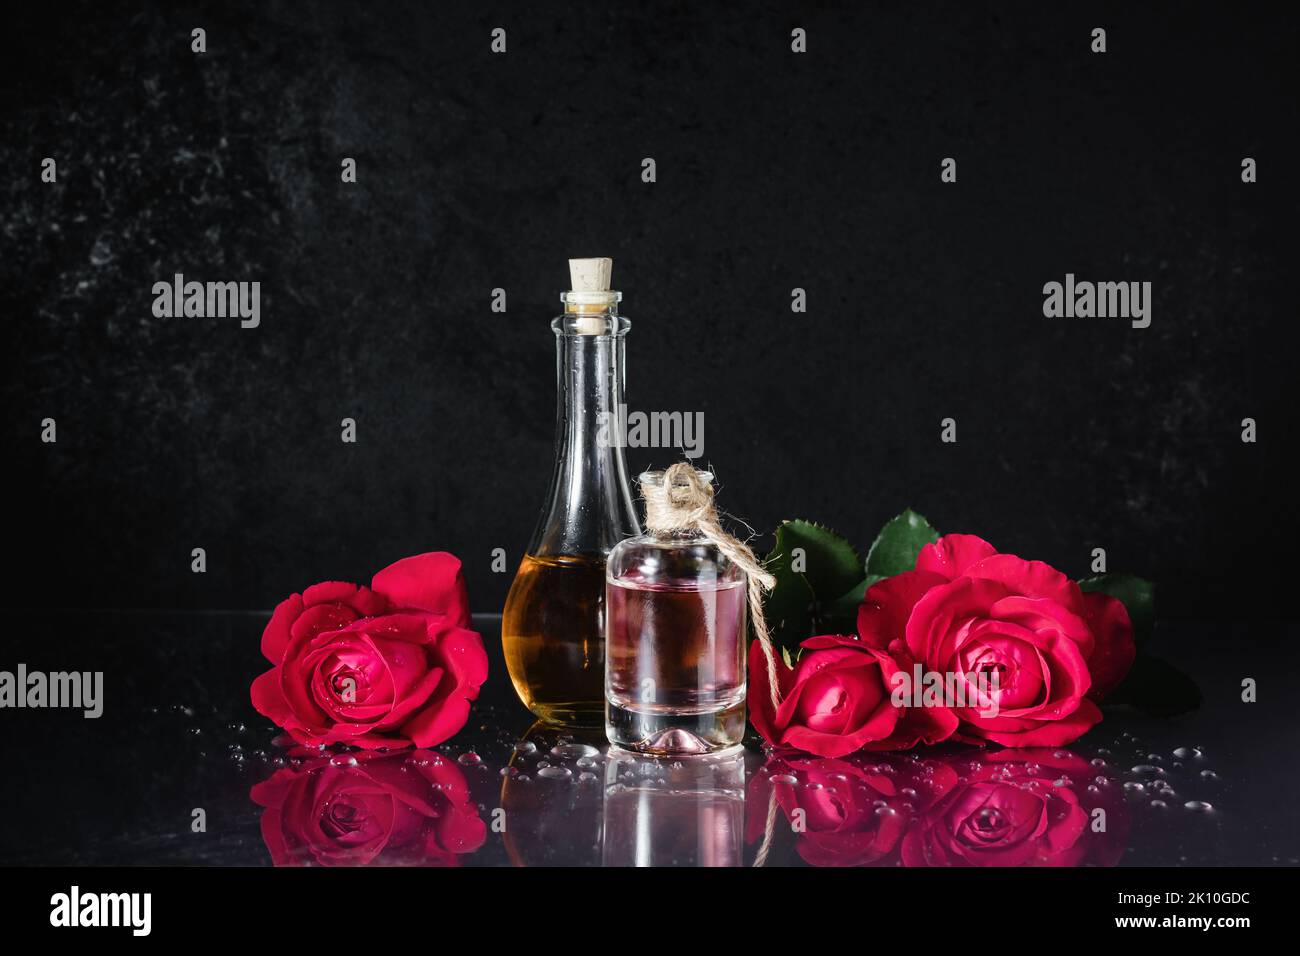 Bottles of perfume and red roses on a black background. Stock Photo